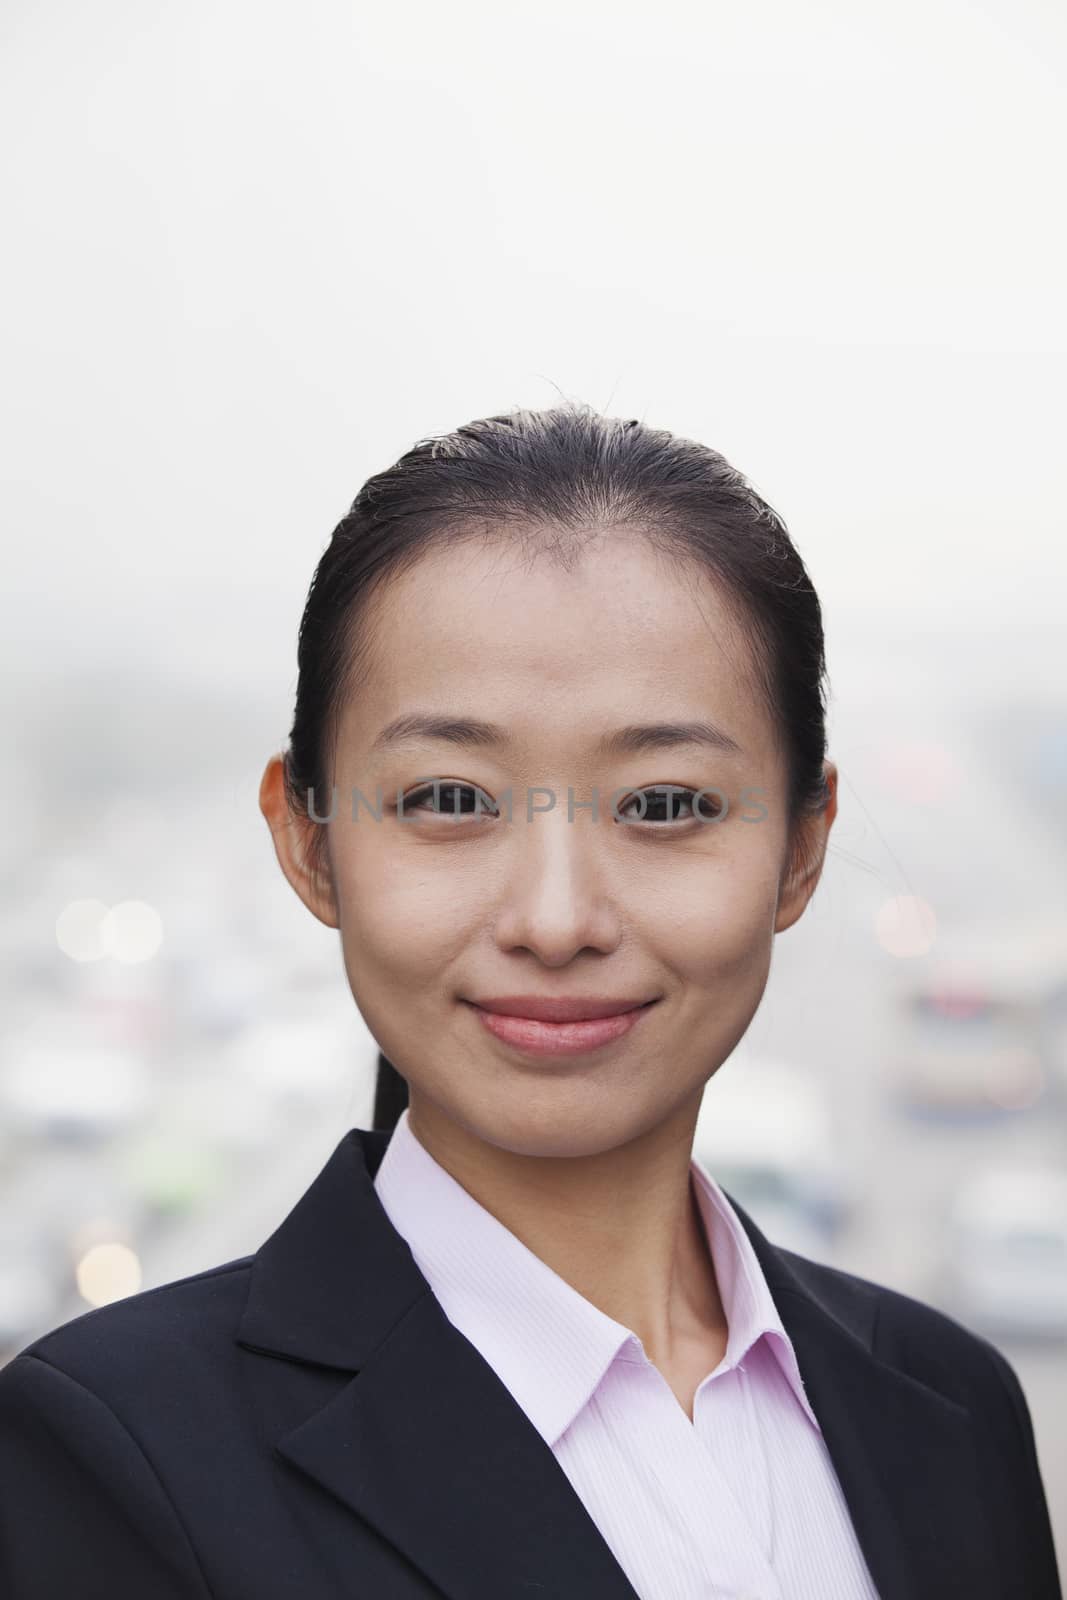 Portrait of Young Businesswoman Looking at Camera with Traffic Below